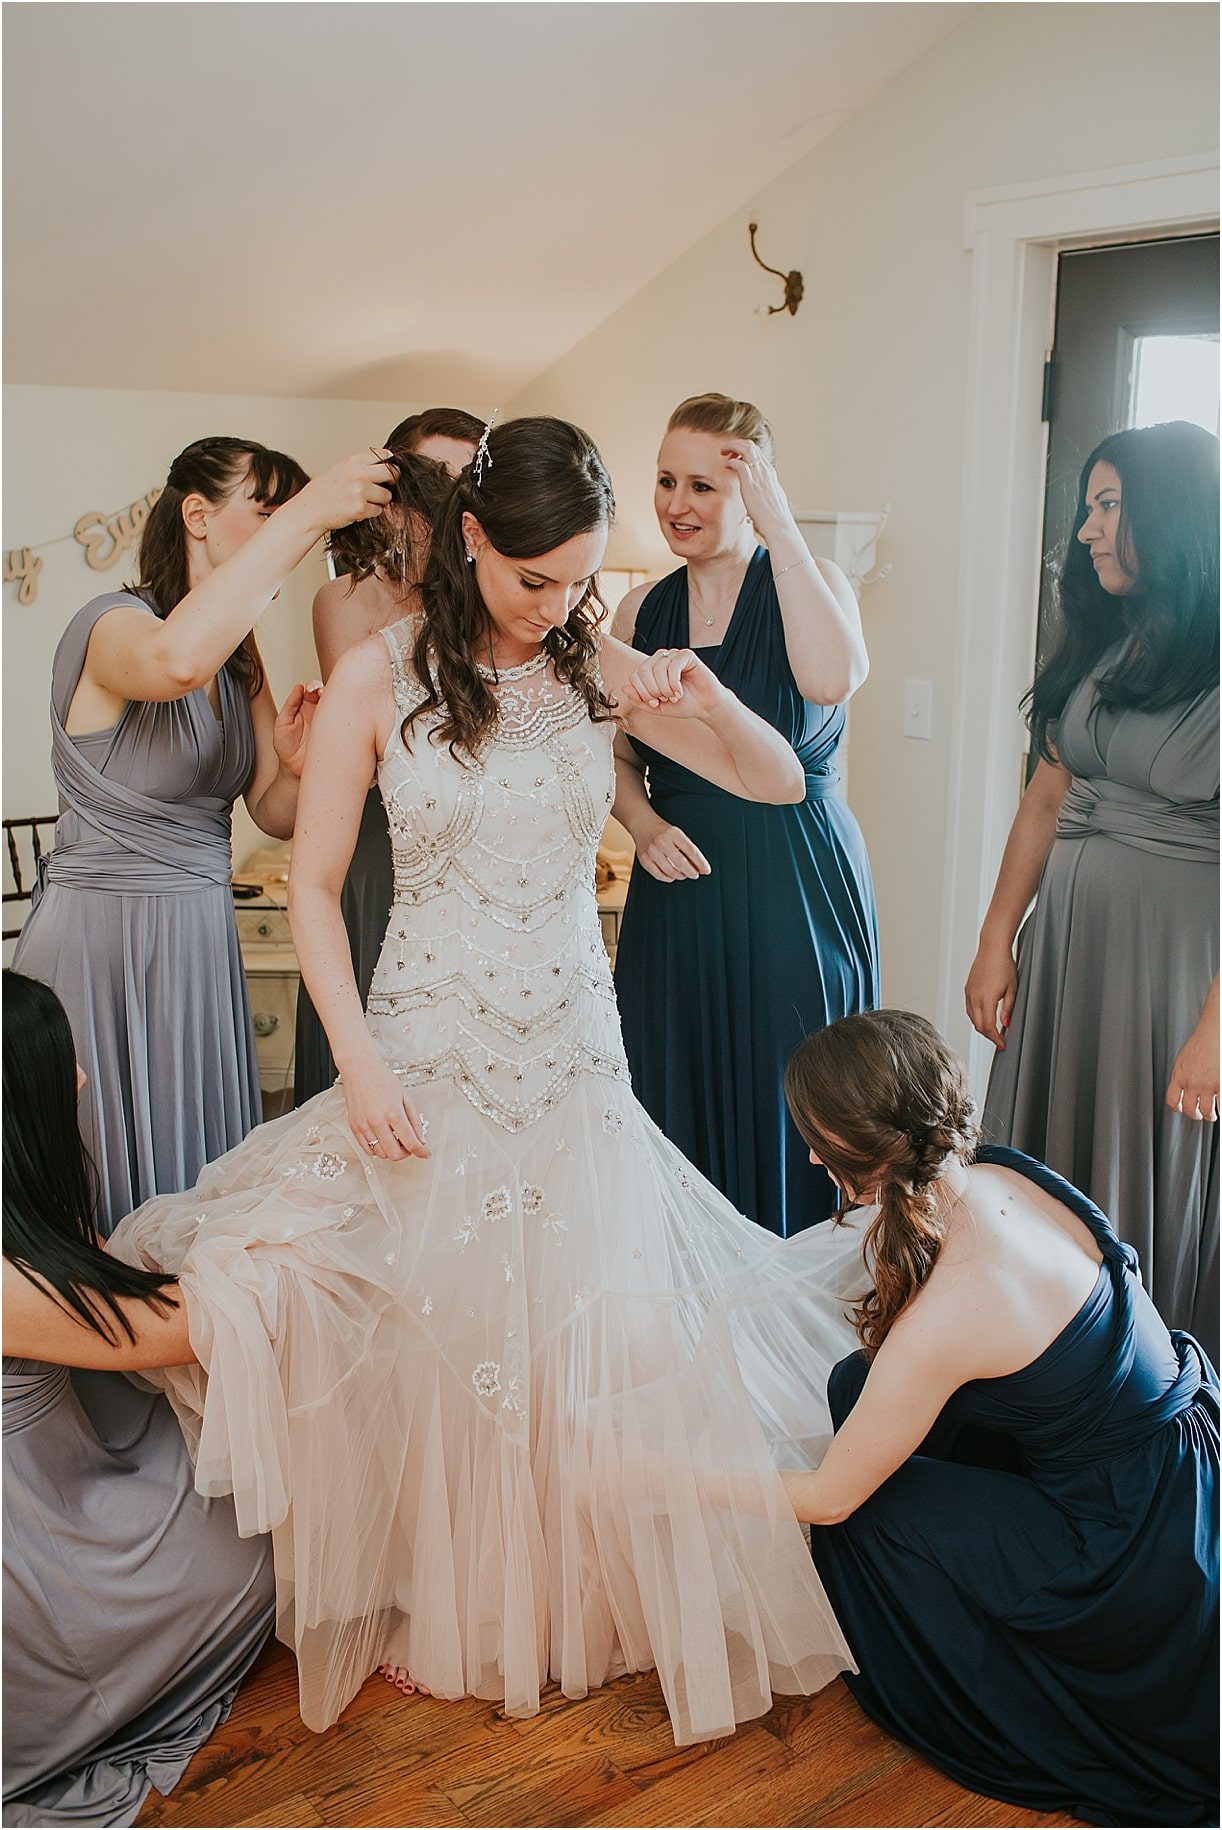 Lovely Virginia Vineyard Wedding as seen on Hill City Bride Blog by Vness Photography - getting ready